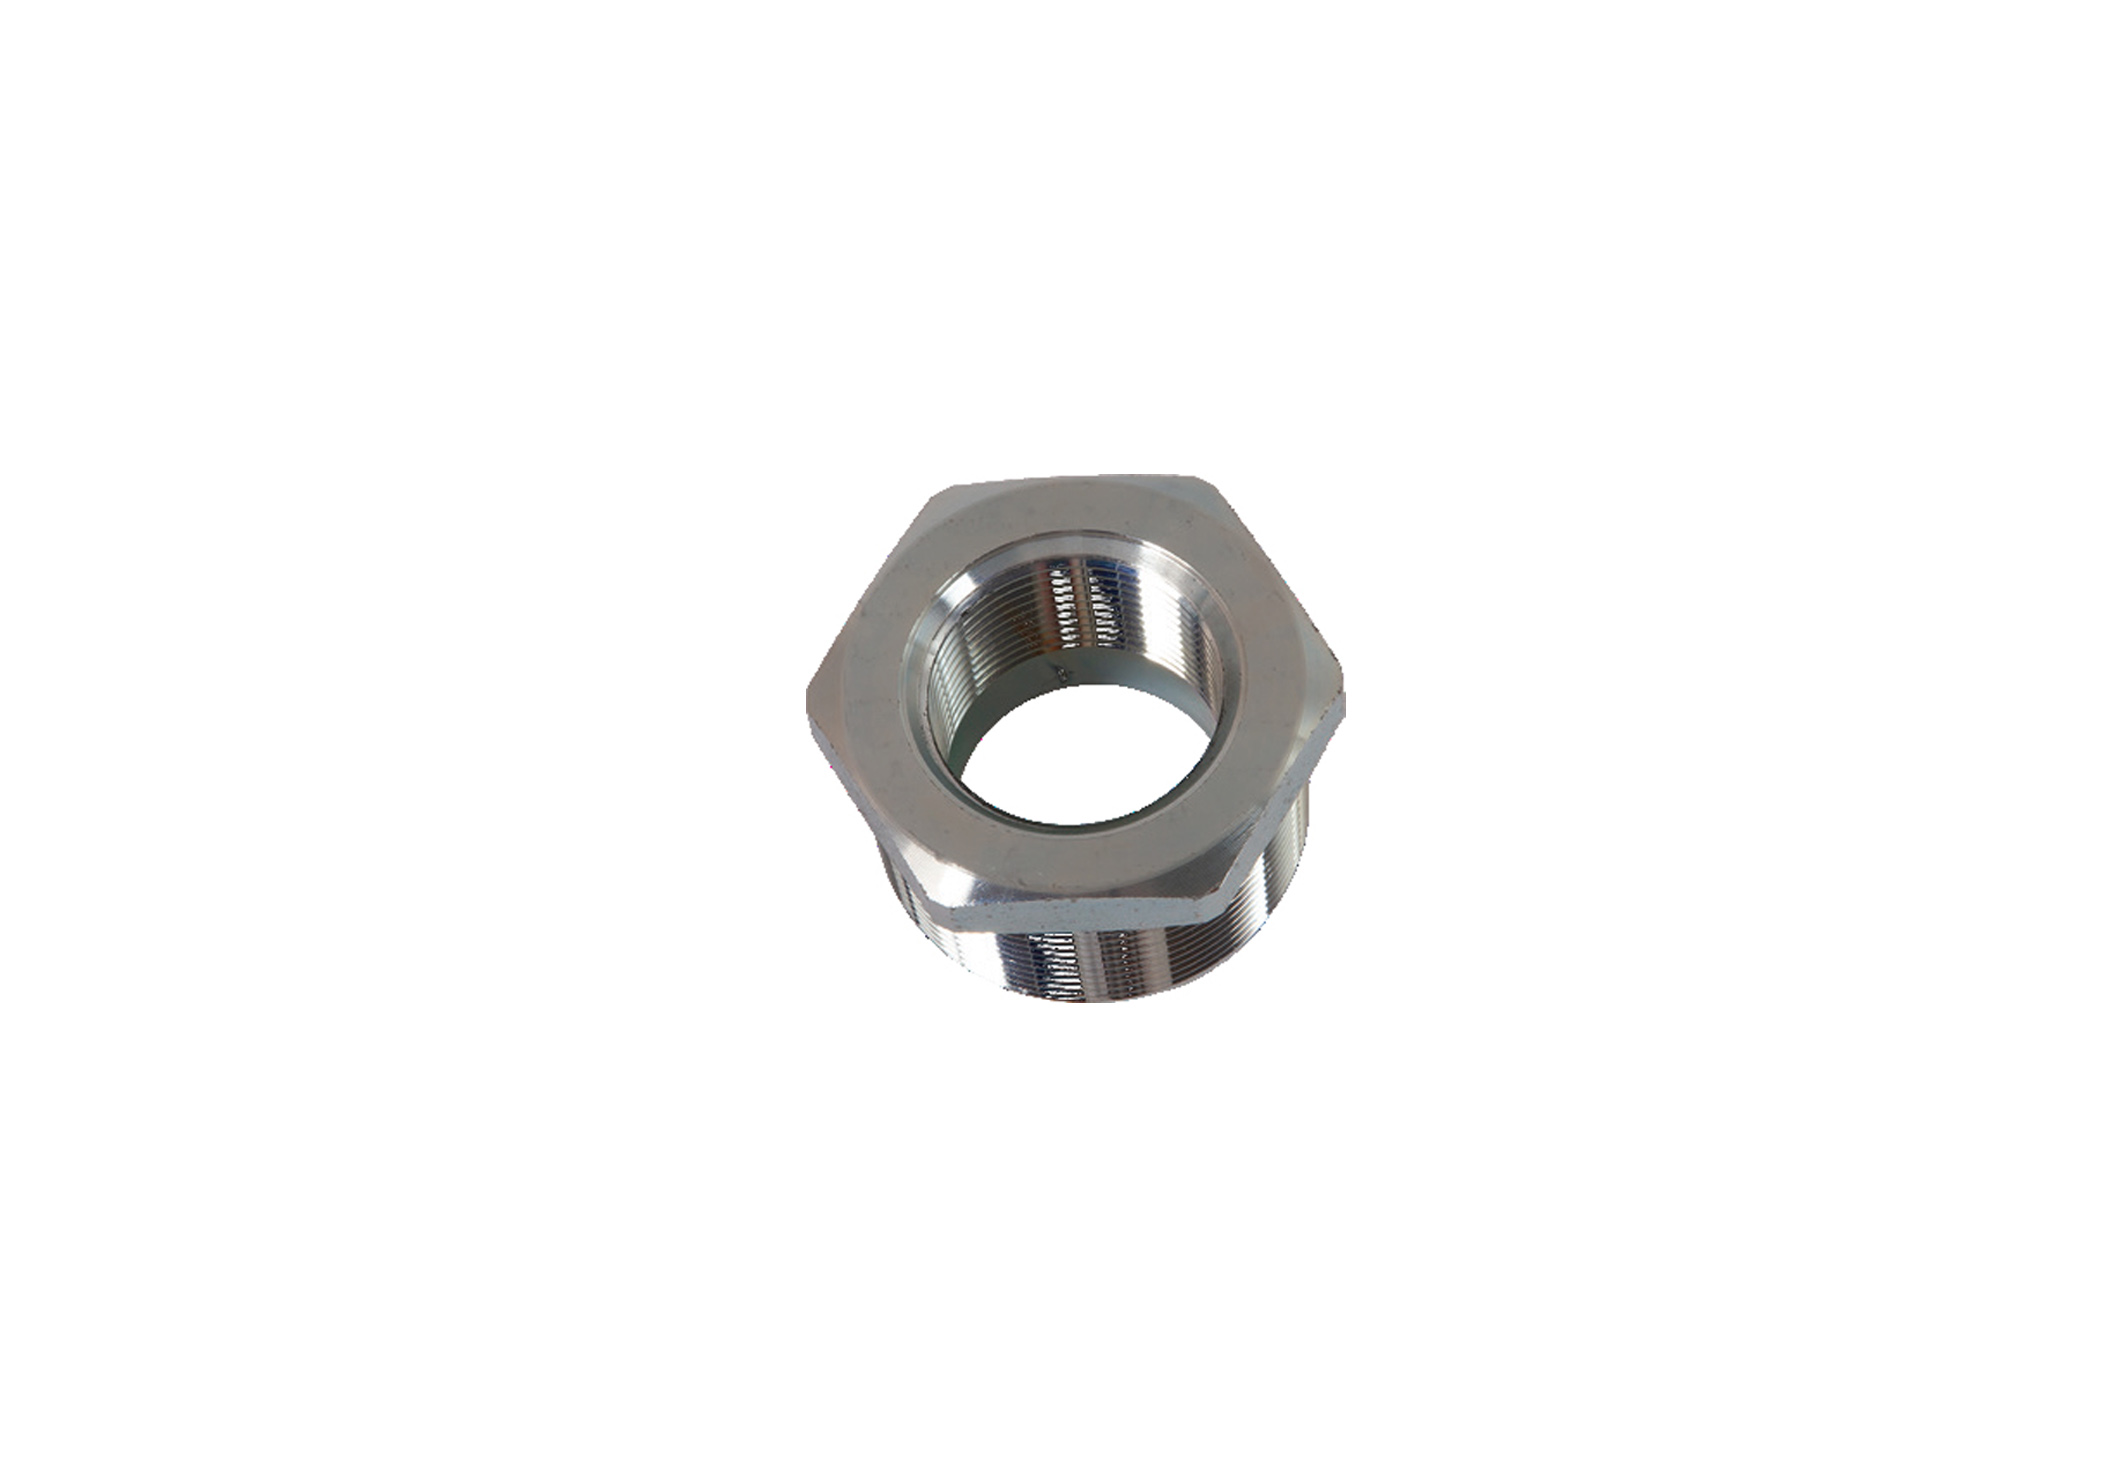 Porting-Components - Port-Reducer-Bushing-2-x-1-14